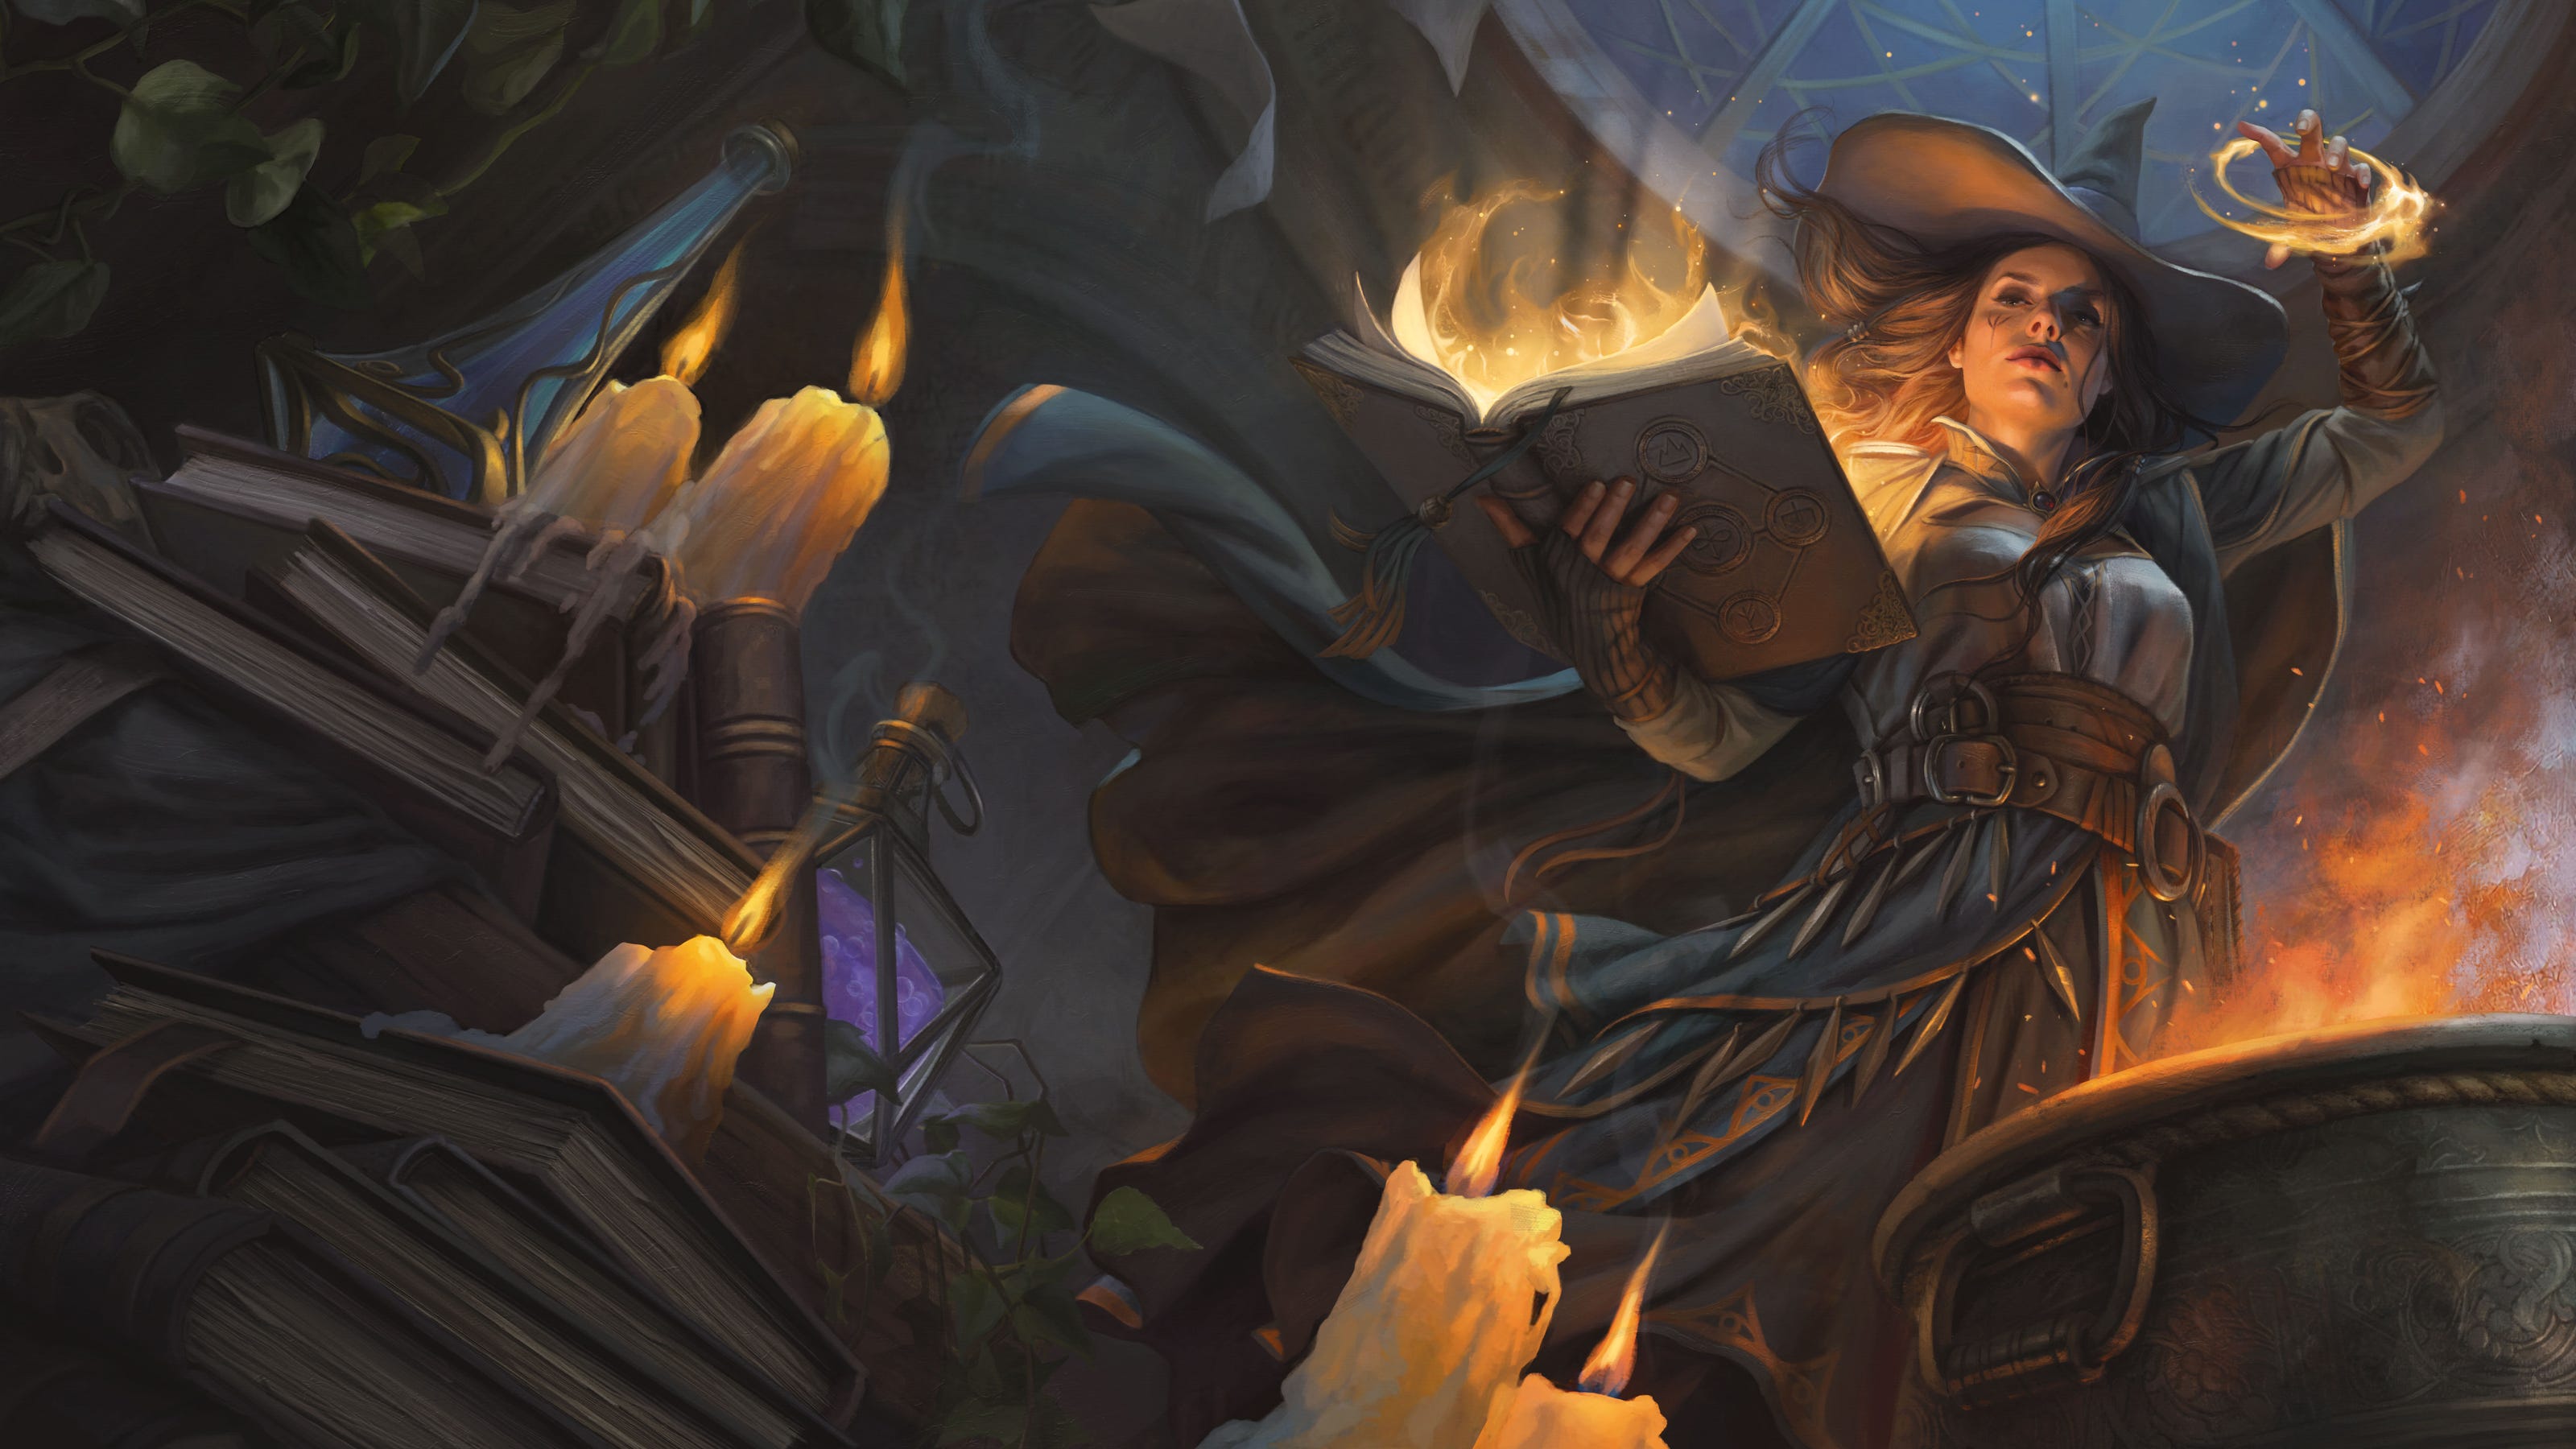 Diversity comes to fantasy in Dungeons & Dragons' upcoming sourcebook